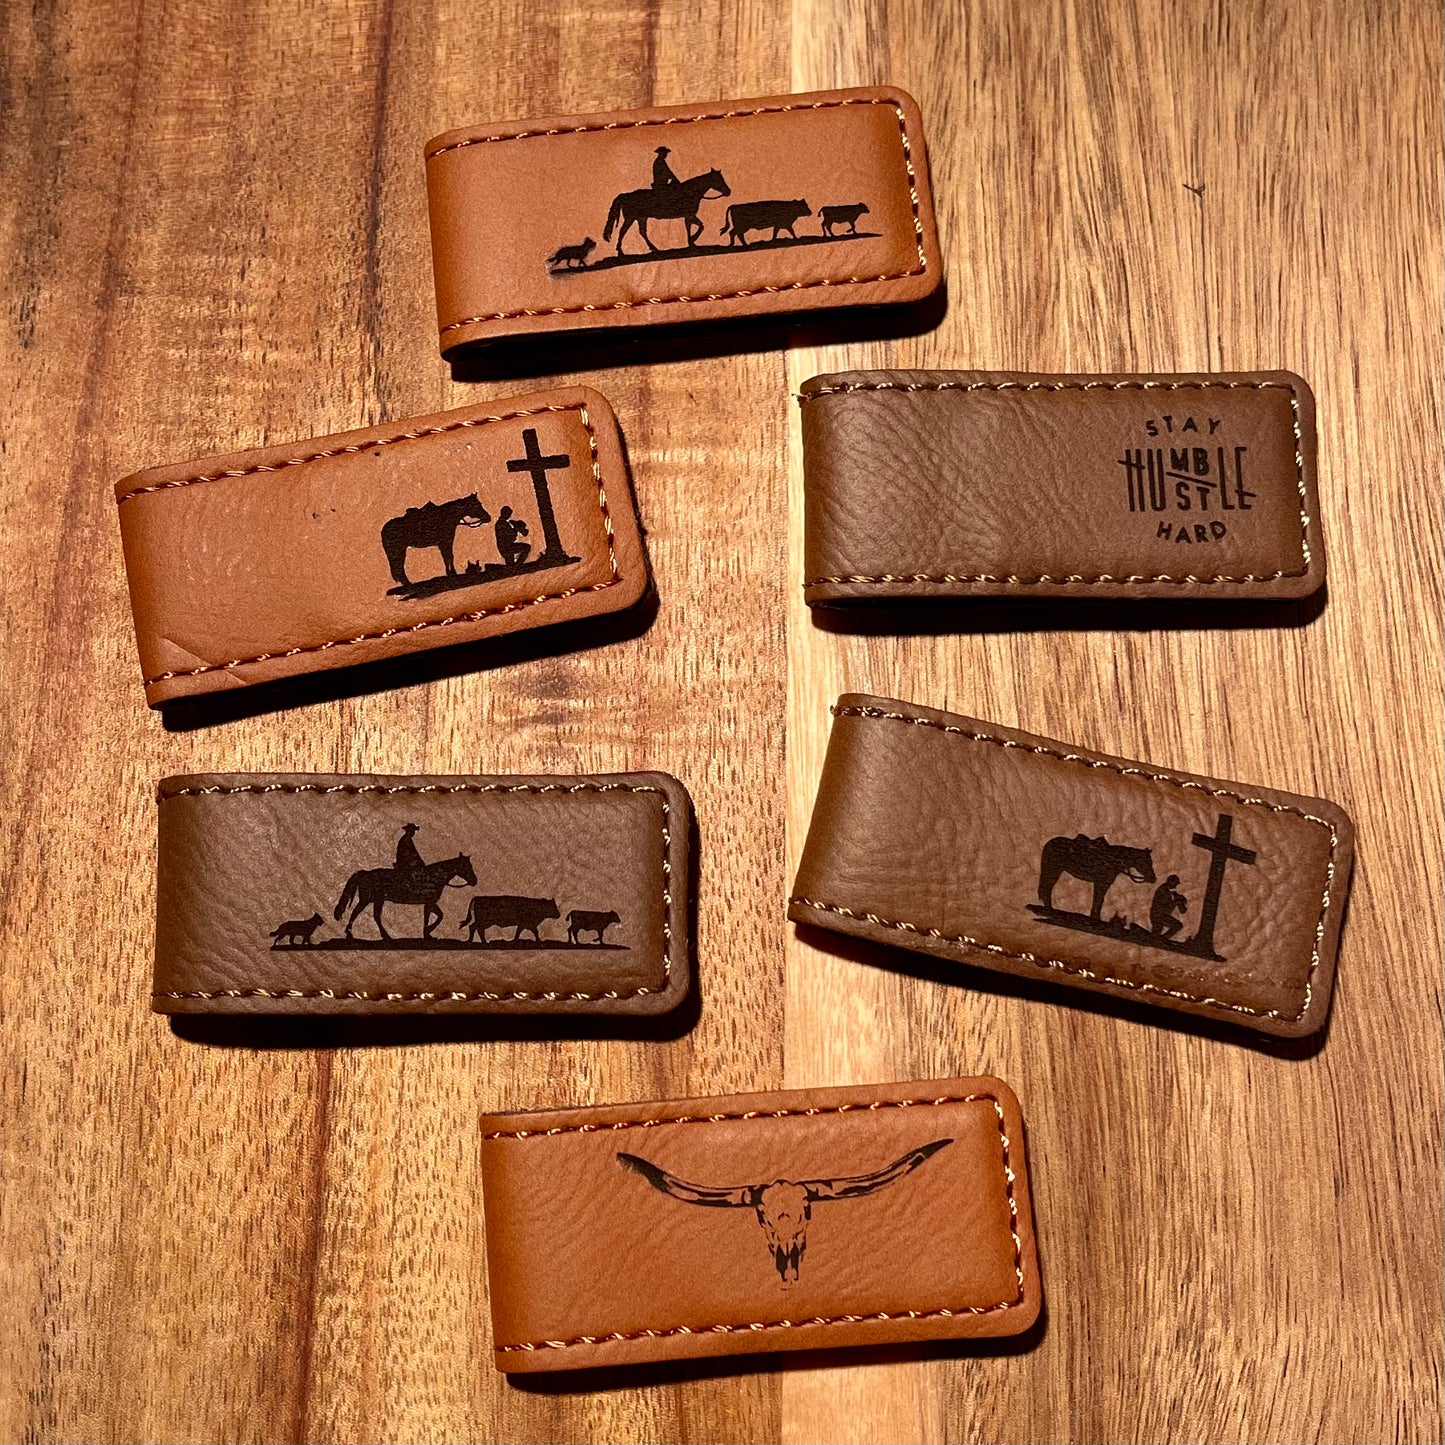 Personalized Money Clips